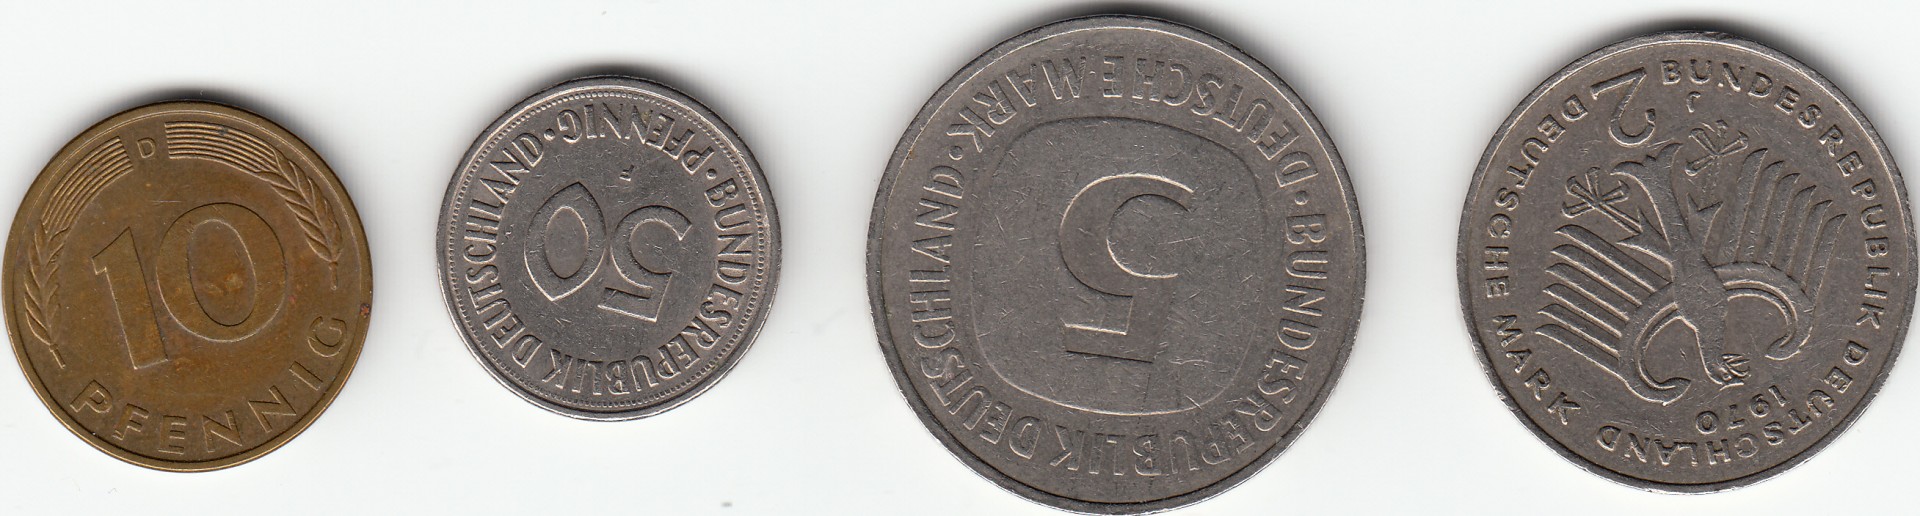 german coins currency free photo